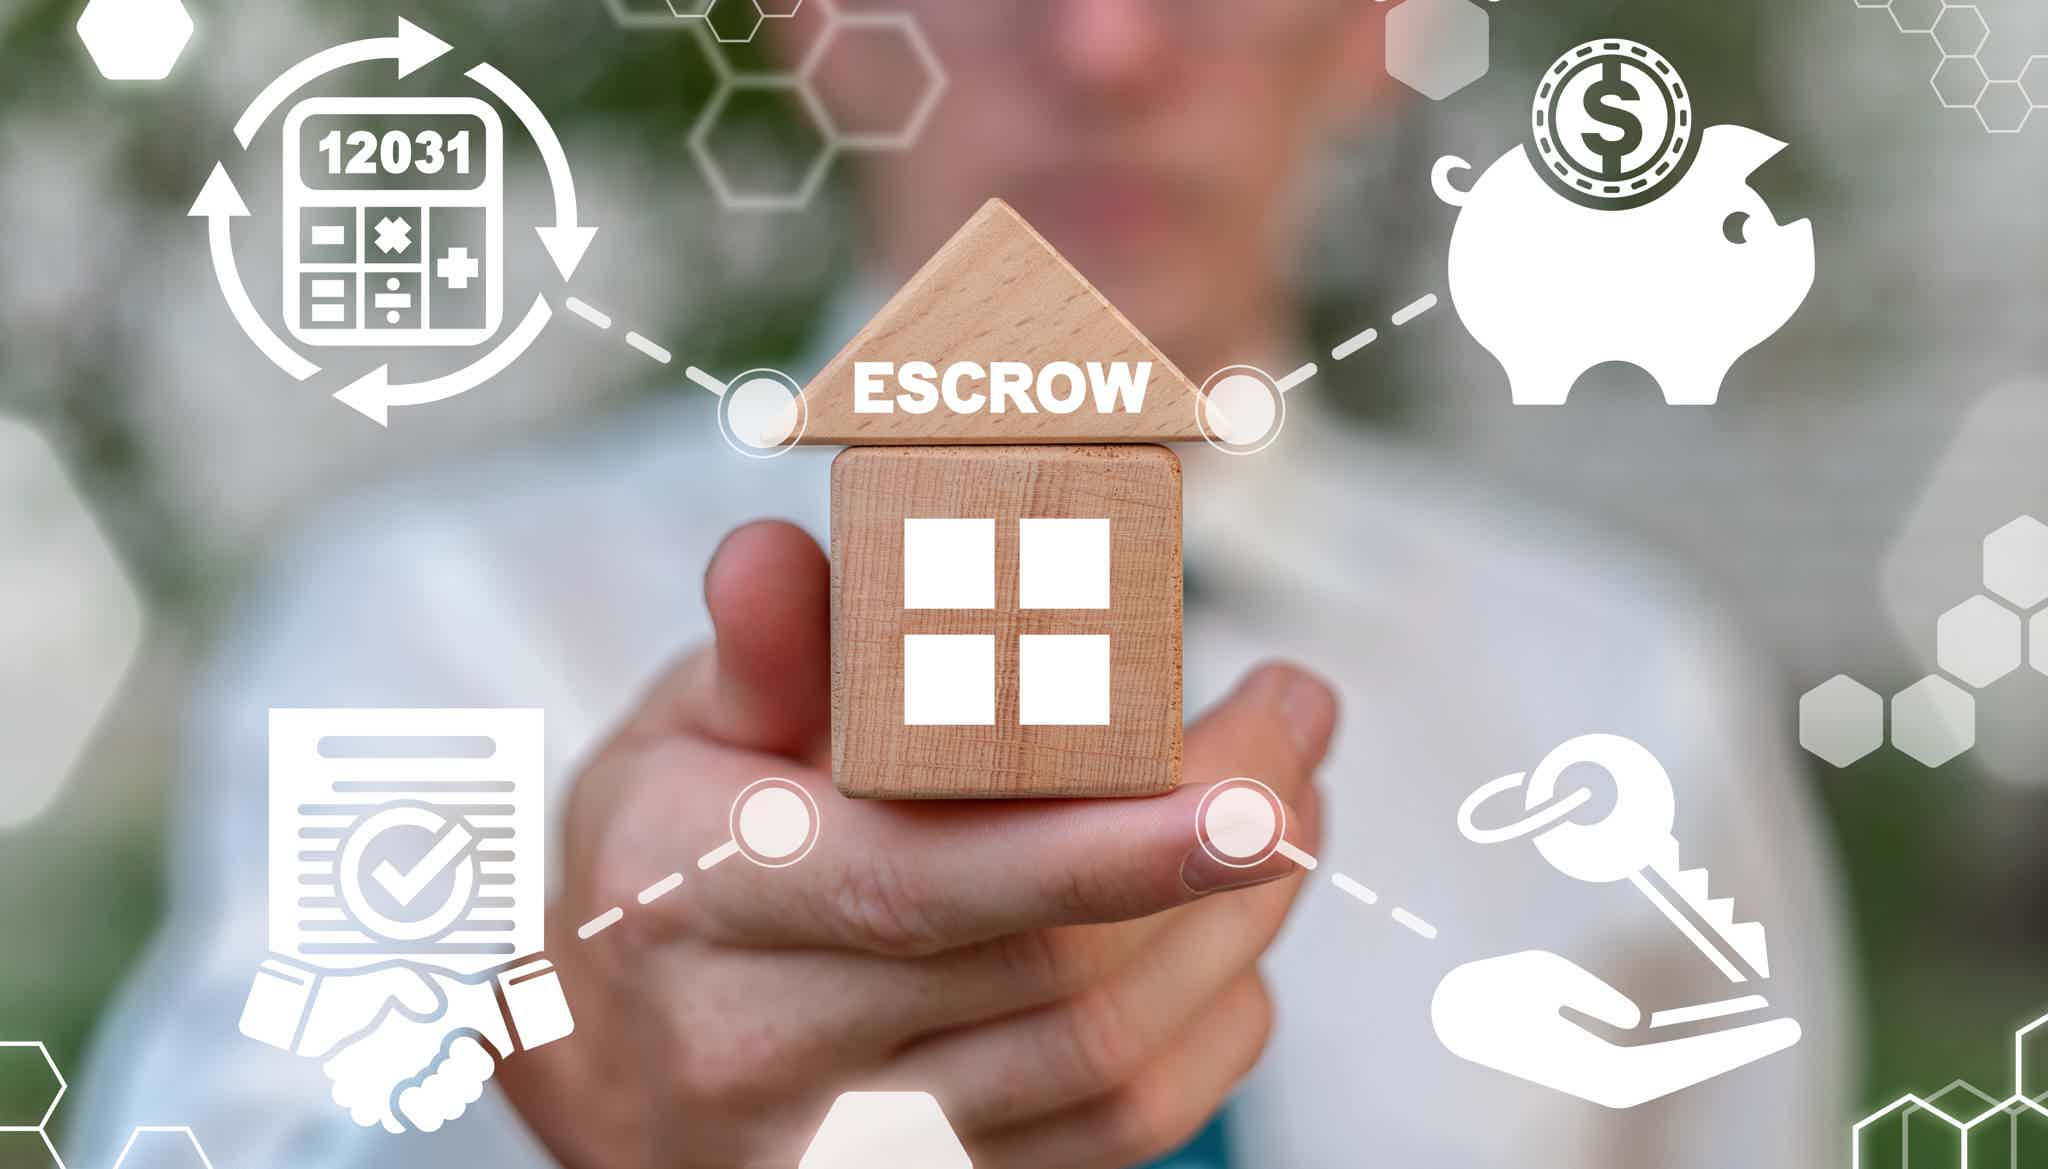 Learn how to open your escrow account. Source: Adobe Stock.